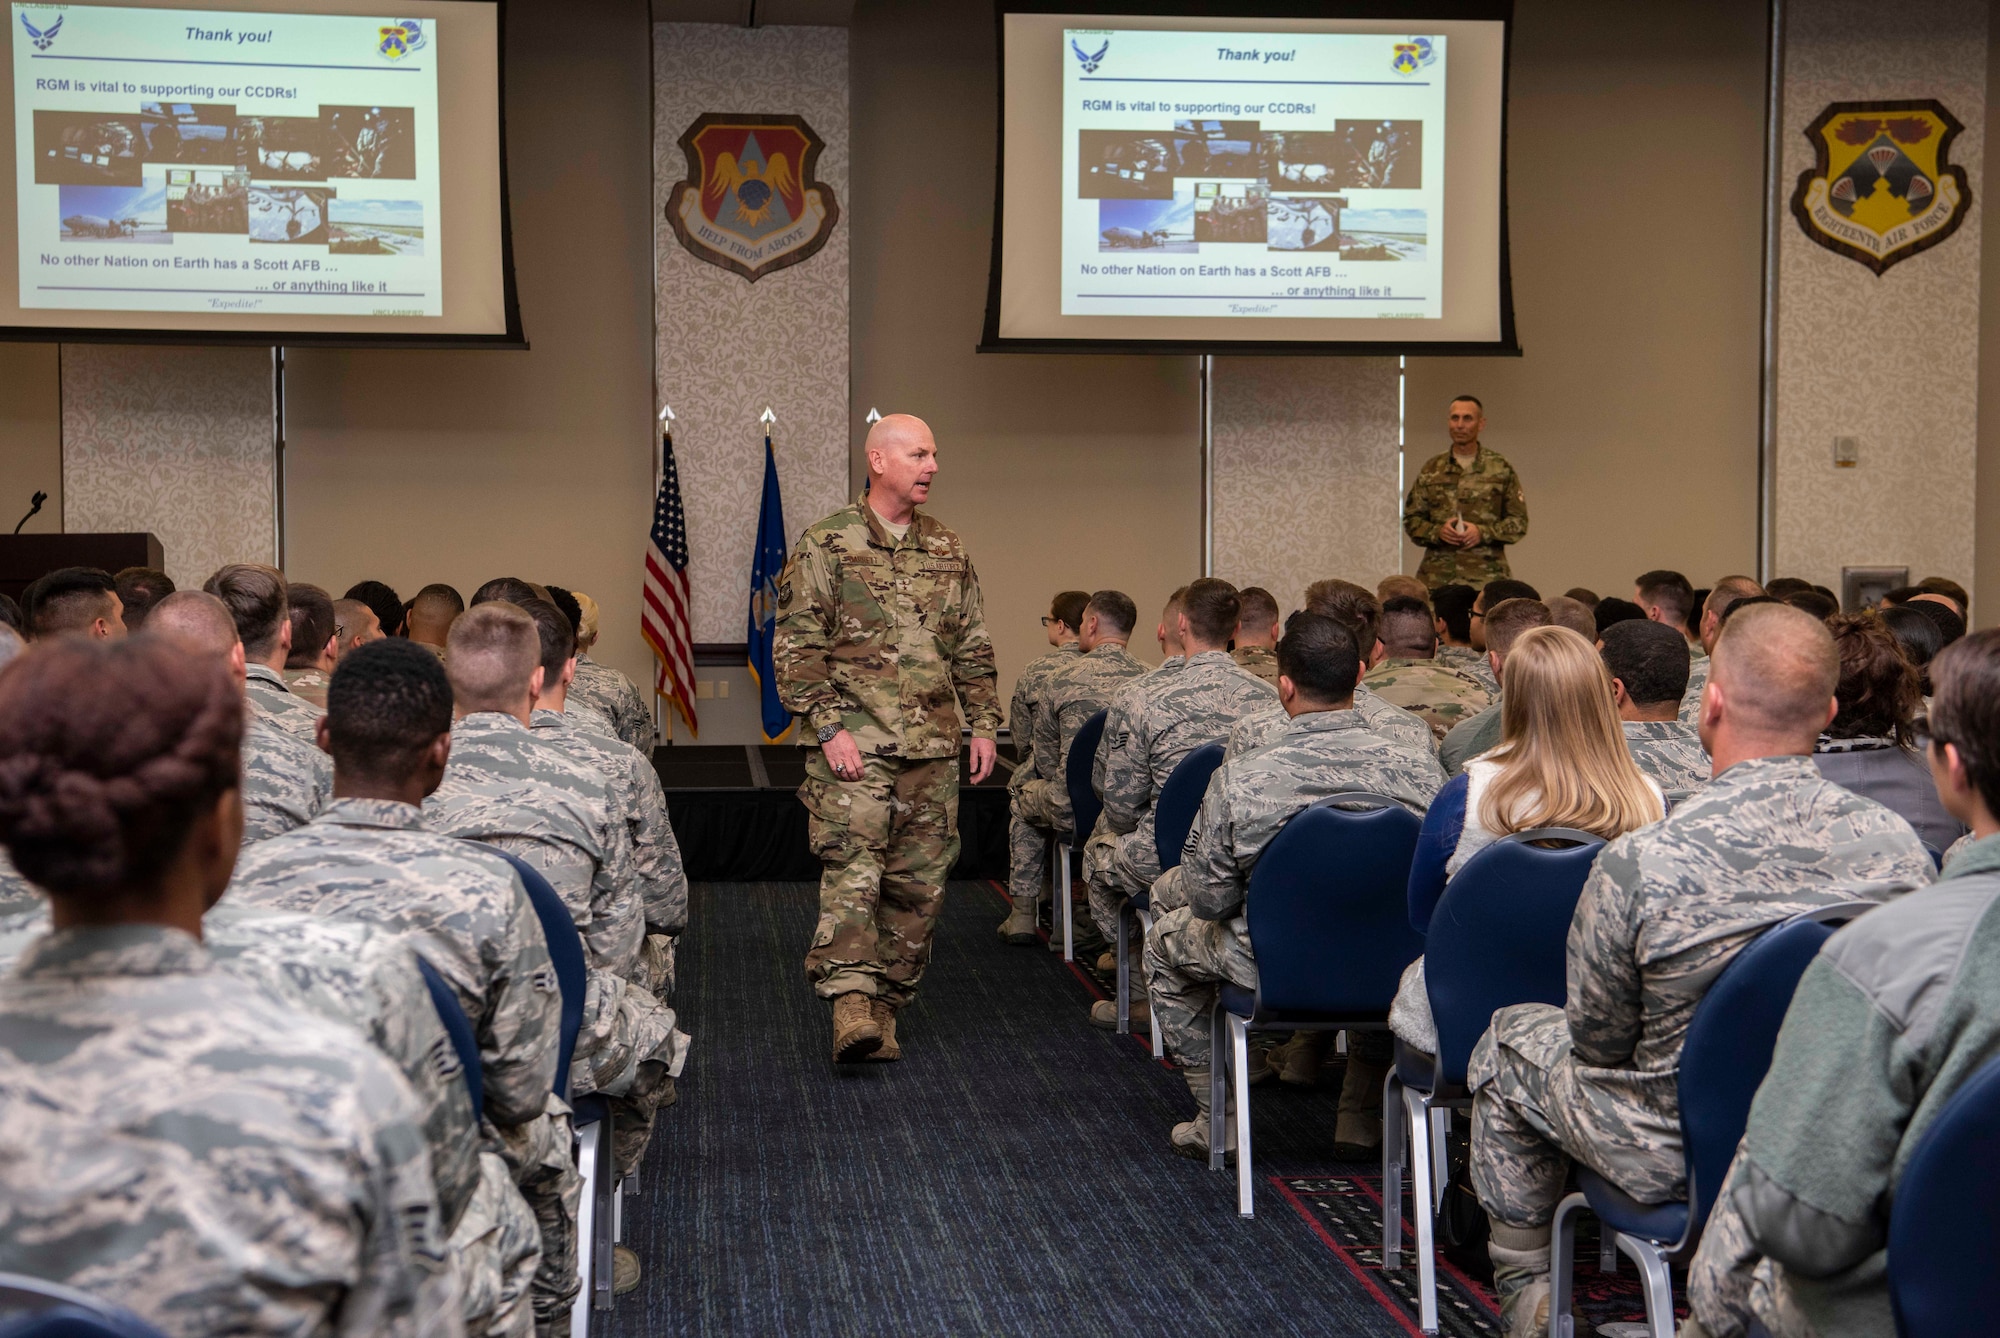 Maj. Gen. Sam Barrett, 18th Air Force commander, speaks during a commander’s call Oct. 12, 2018 at Scott Air Force Base, Illinois. A commander’s call is a direct form of communication were Airmen of different units, who don’t always get an opportunity to speak to the commander, can voice their opinions and receive vital information. (U.S. Air Force photo by Senior Airman Melissa Estevez)